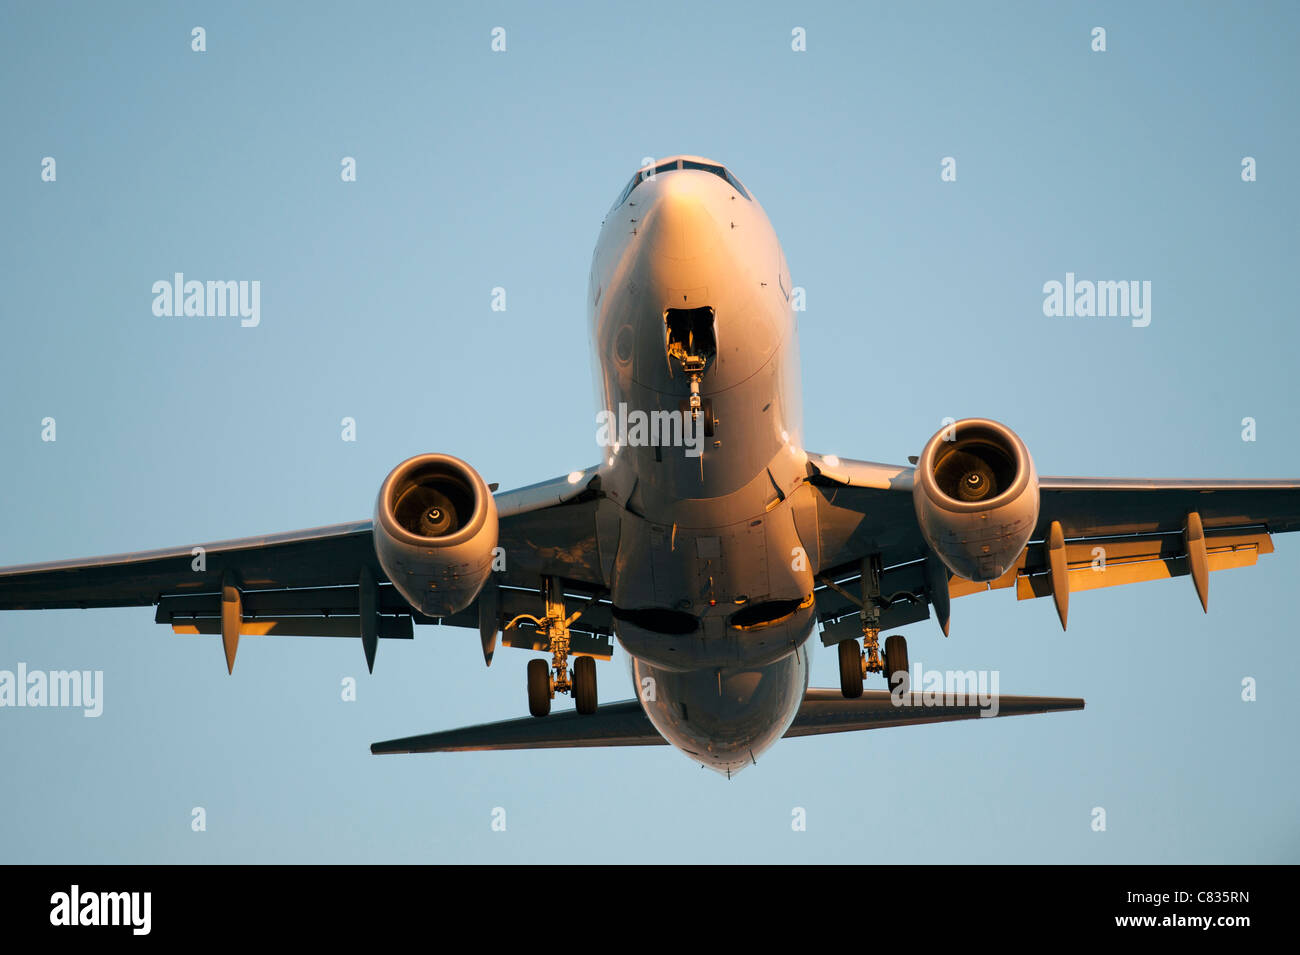 Aircraft with two jet engines Stock Photo